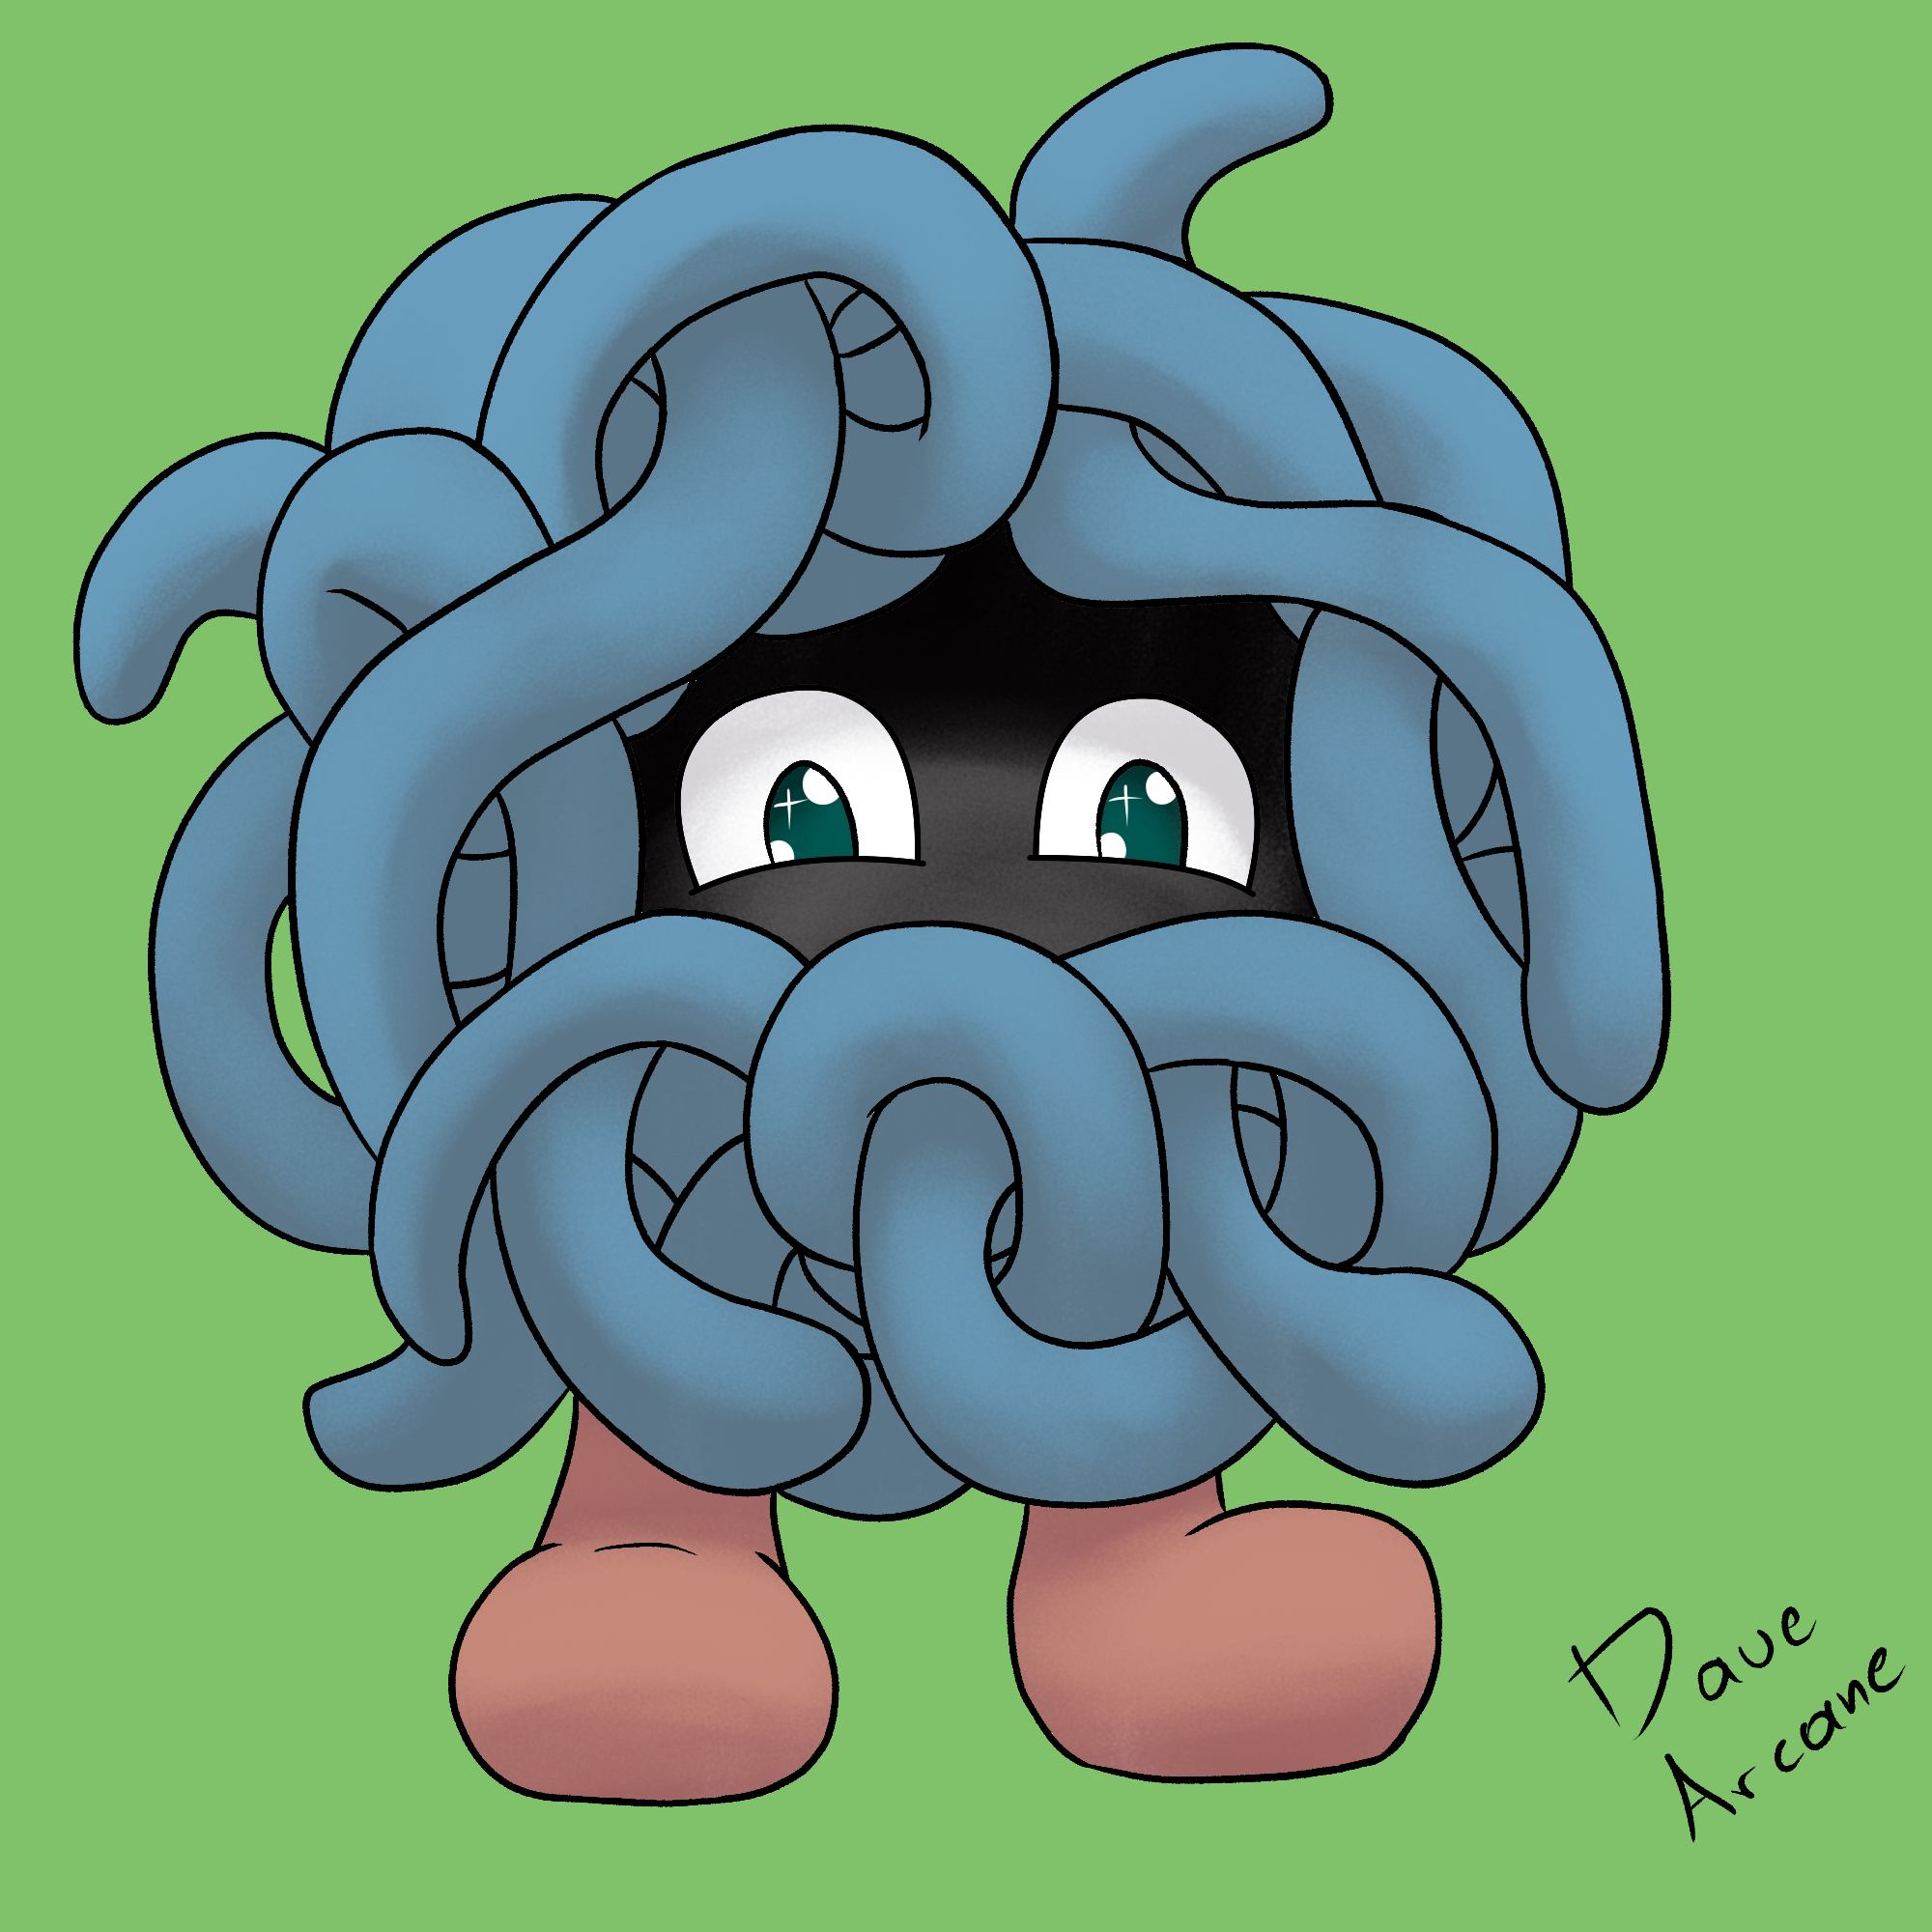 Dave Drawing 1 Pokemon Each Day Day 114 Of Drawing One Pokemon Per Day Top 10 Twisted Pokemon Follow Me To See The Upcoming Pokemon Drawings Pokemon Pokemonart Drawing Tangela